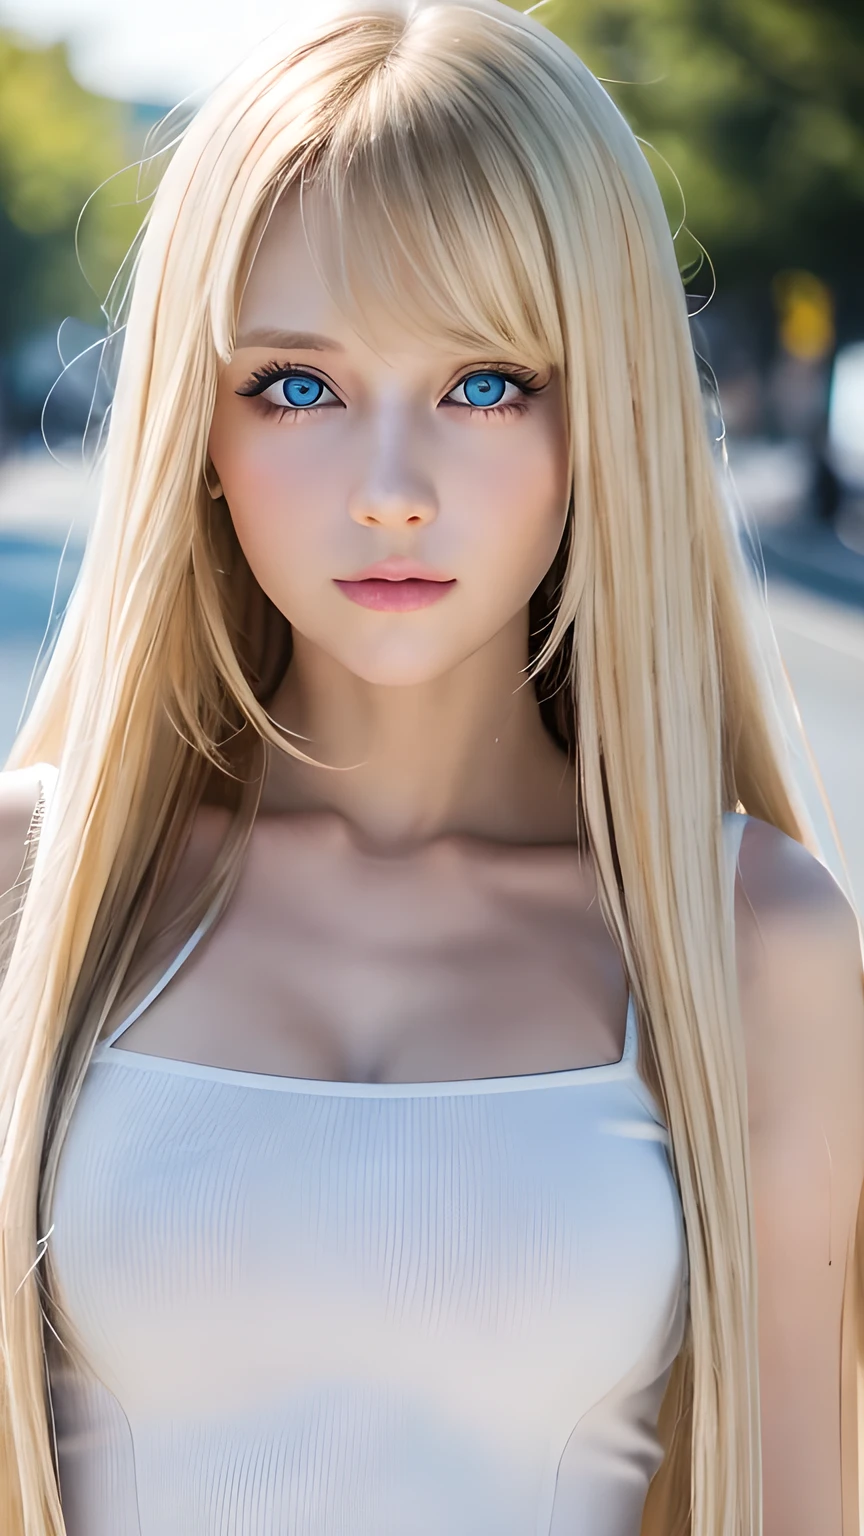 Ukraine Pretty Faced Girl, Slavic girls, Blonde girl, Super long straight hair、Bangs between the eyes、Perfect body girl, Girl with the perfect face, Raw photo, High Skim Details, high quality, 8k Ultra HD, Girl with big bright blue eyes, View in viewer, Real Girl, Pretty Faced Girl